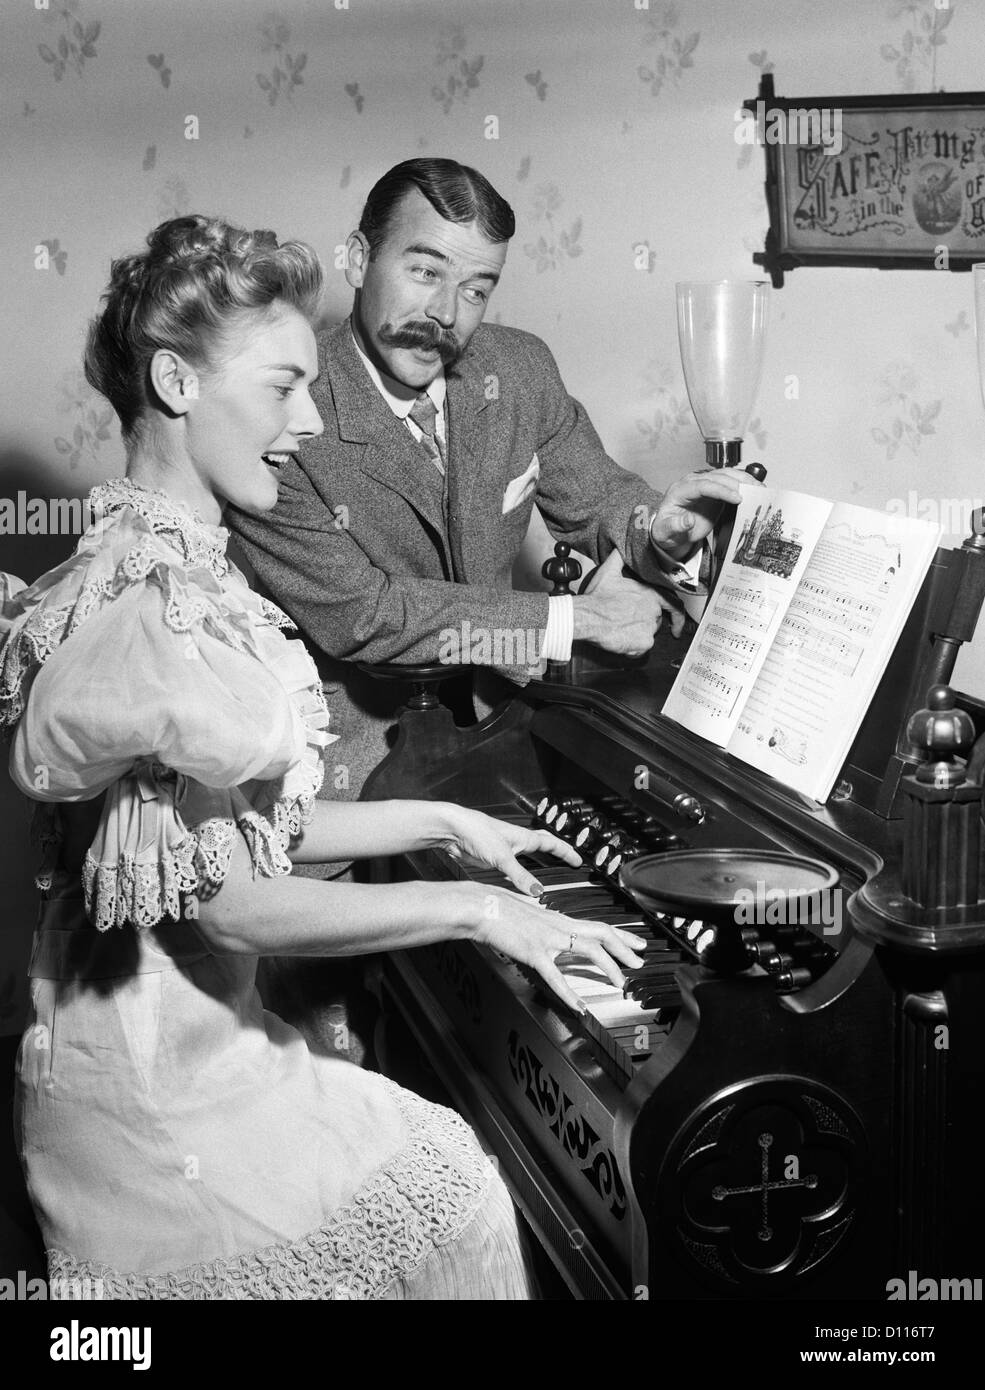 1900s COUPLE IN TURN OF THE CENTURY DRESS WOMAN PLAYING PARLOR ORGAN MAN WITH HANDLEBAR MUSTACHE TURNS PAGES OF SHEET MUSIC Stock Photo